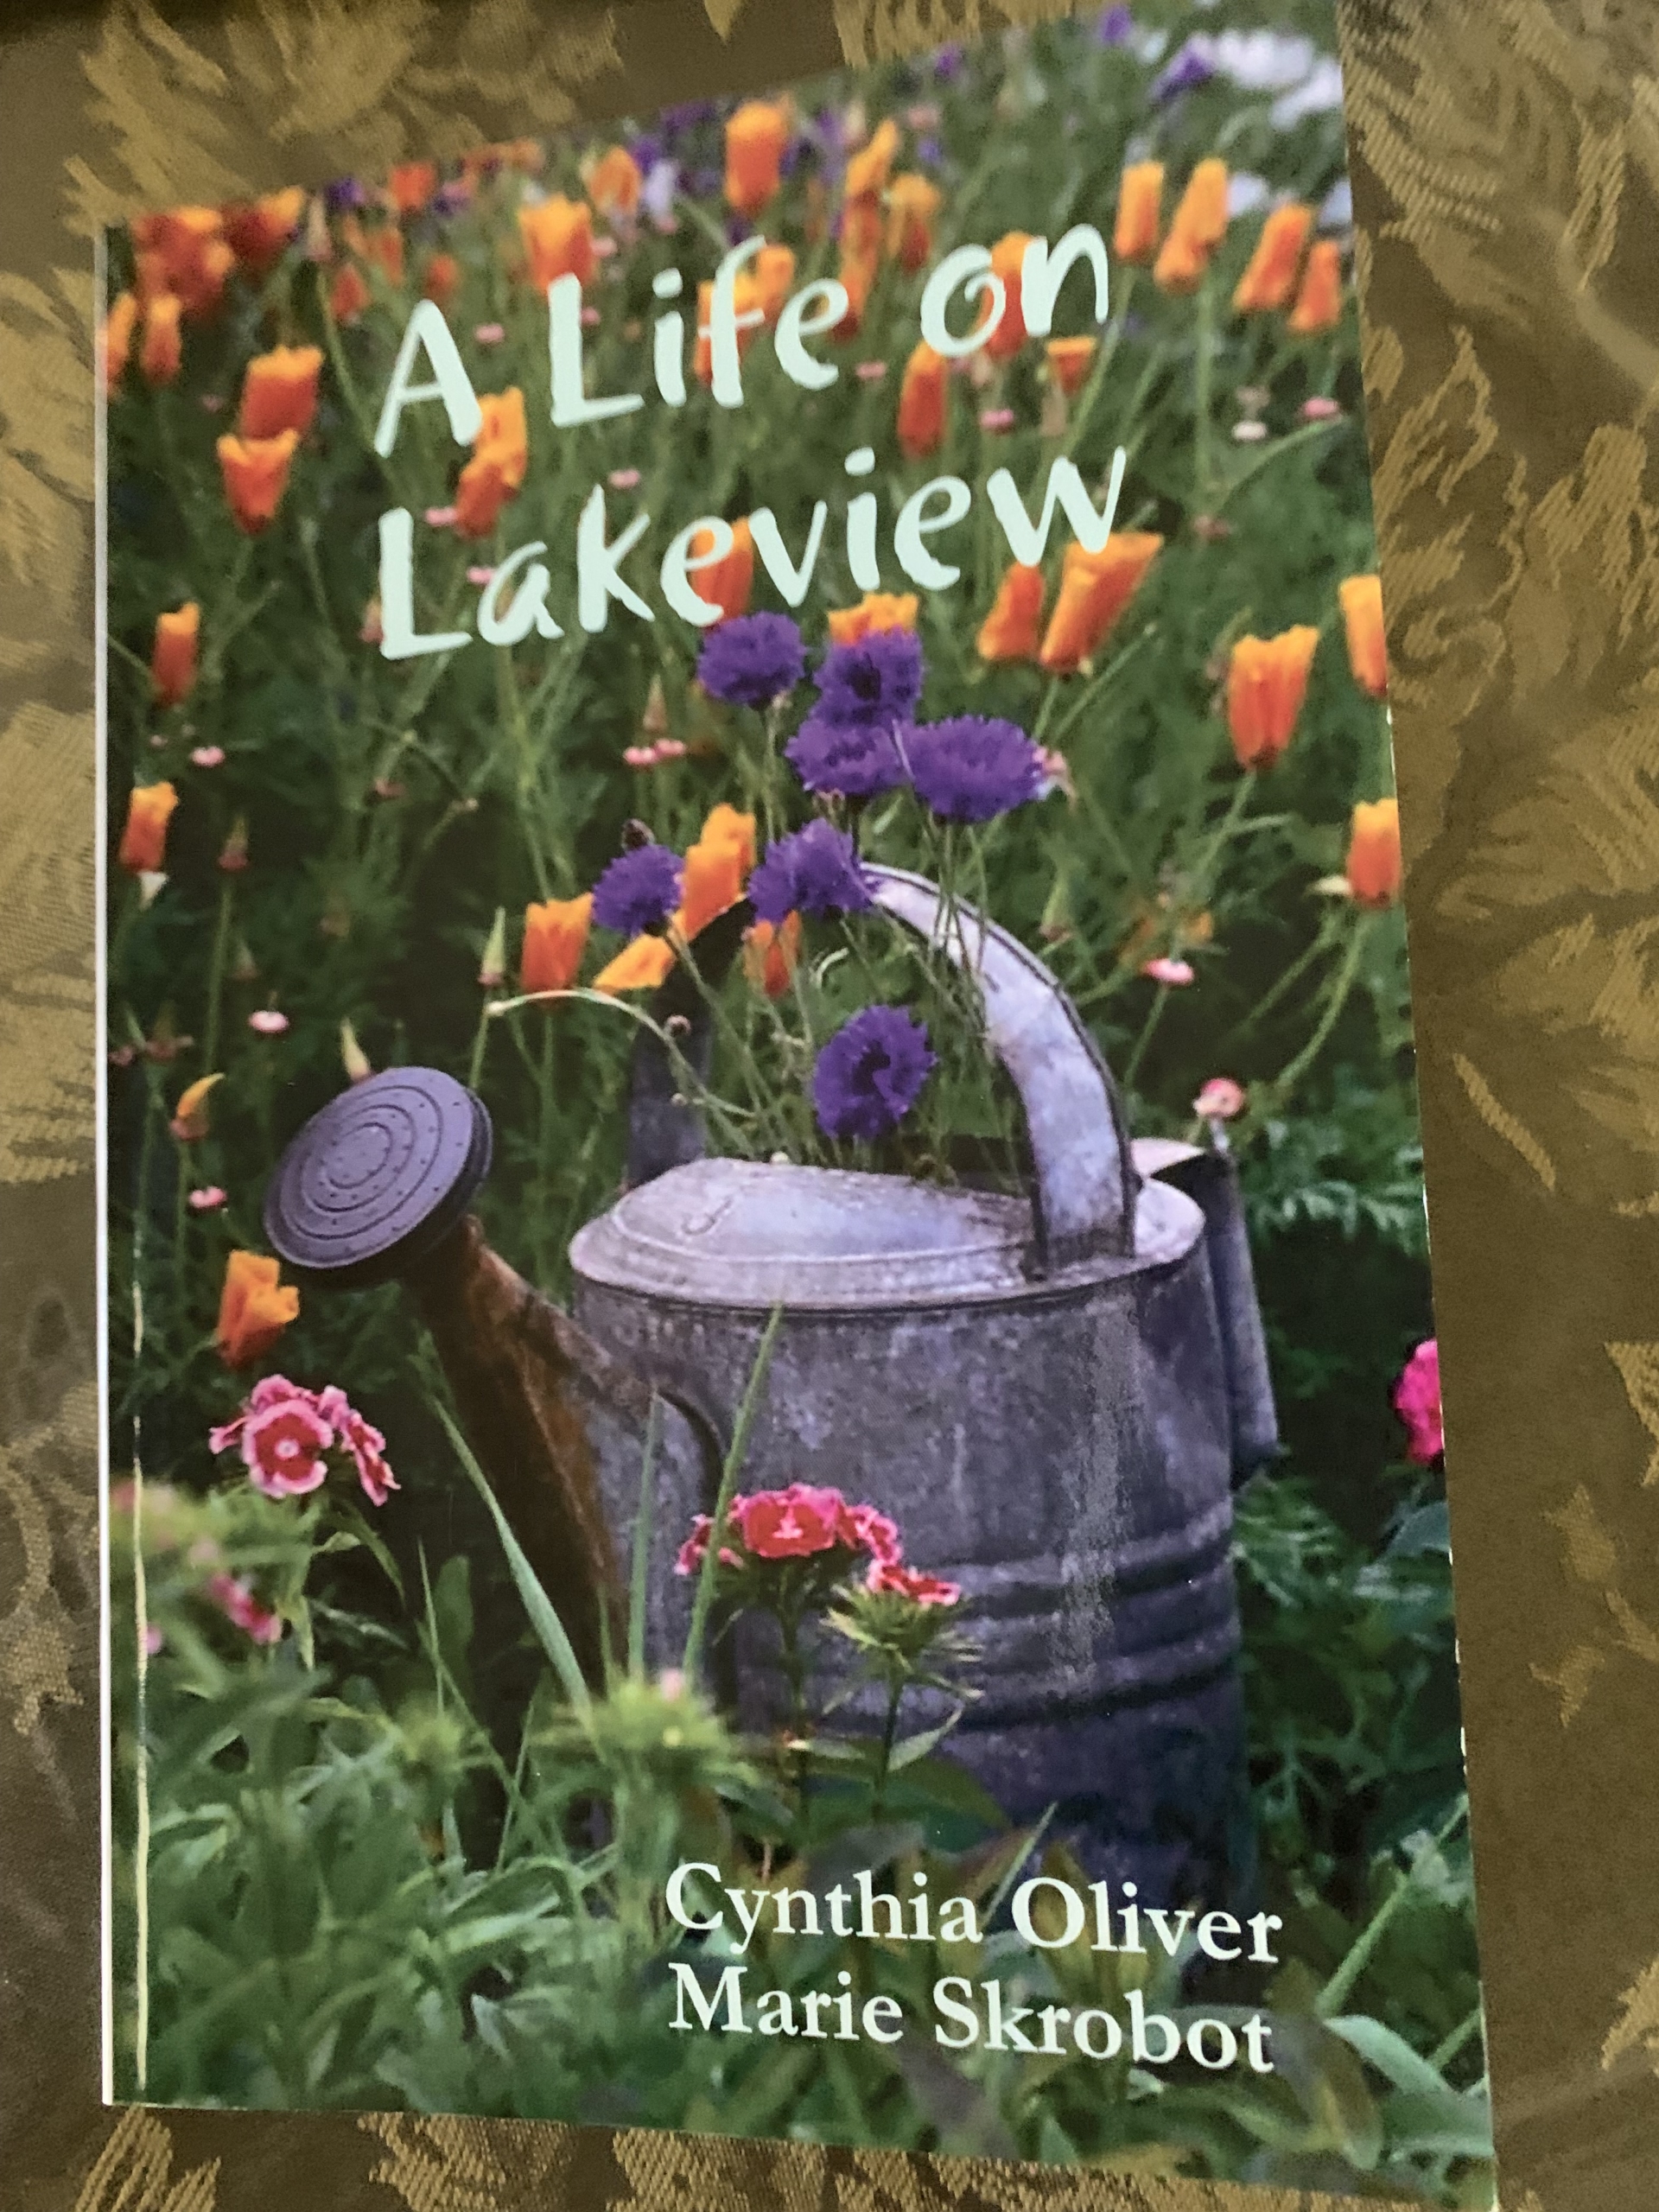 A Life on Lakeview By Cynthia Oliver and Marie Skrobot